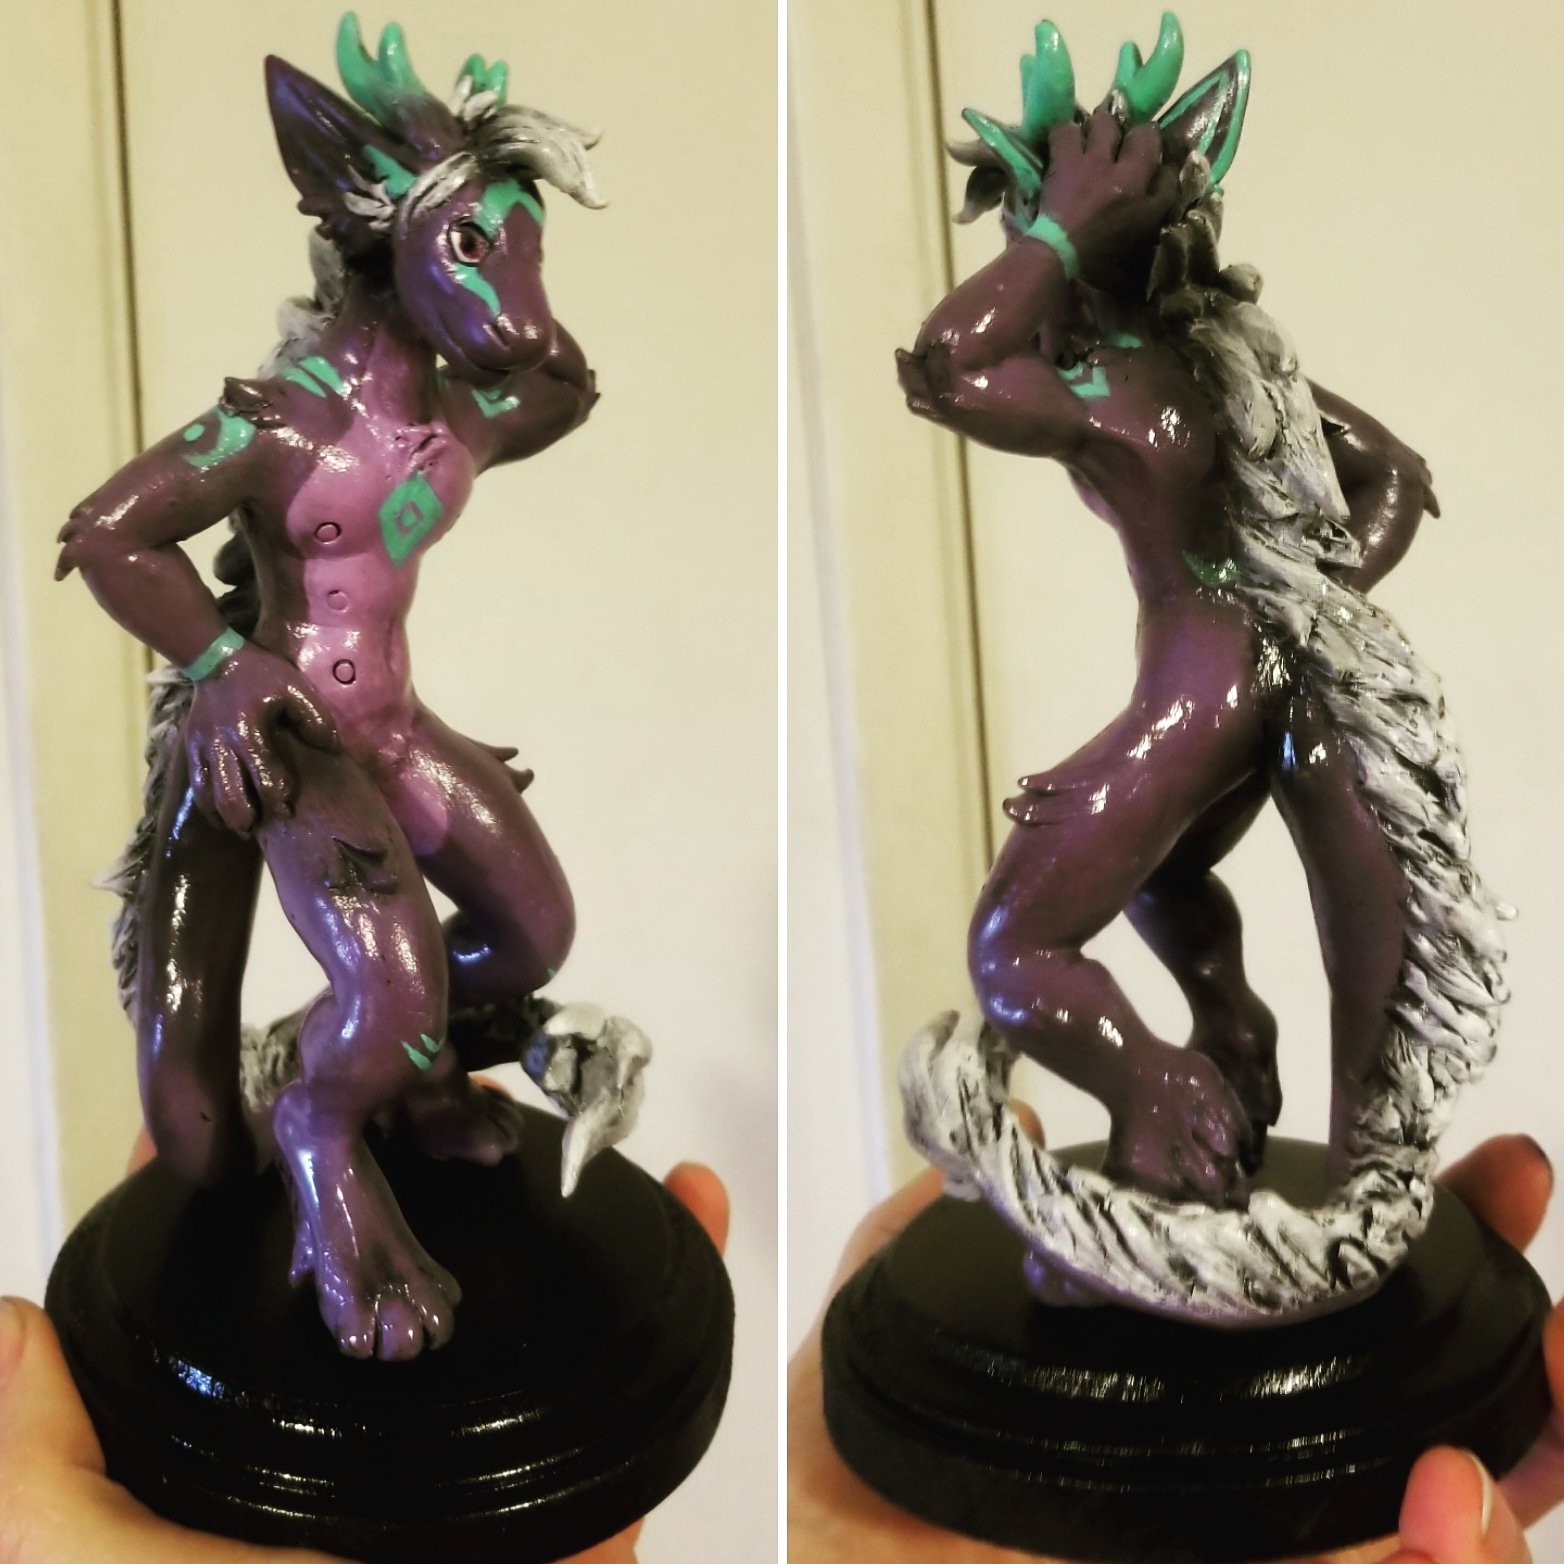 “Furry sculpt comission I finished the other night. 